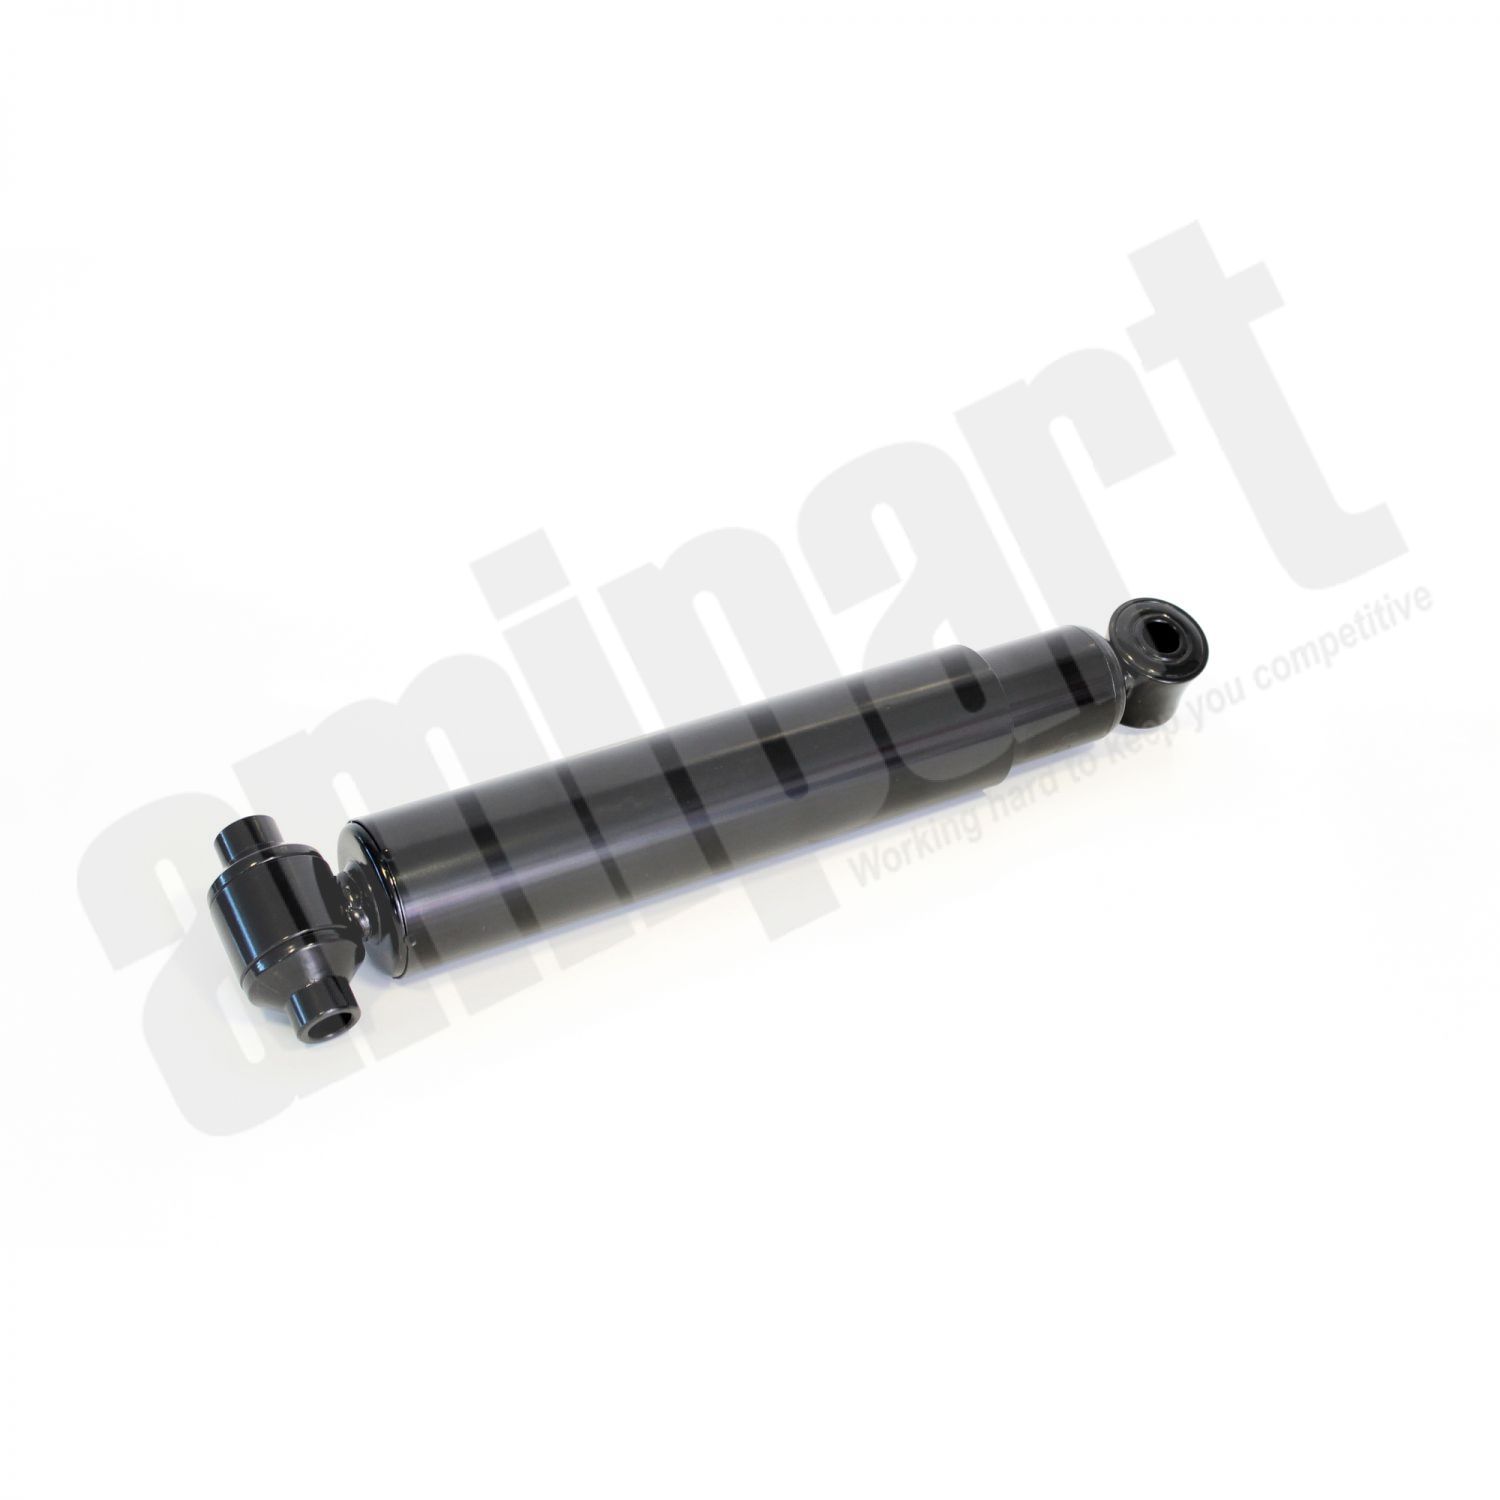 Amipart - MERCEDES SHOCK ABSORBER